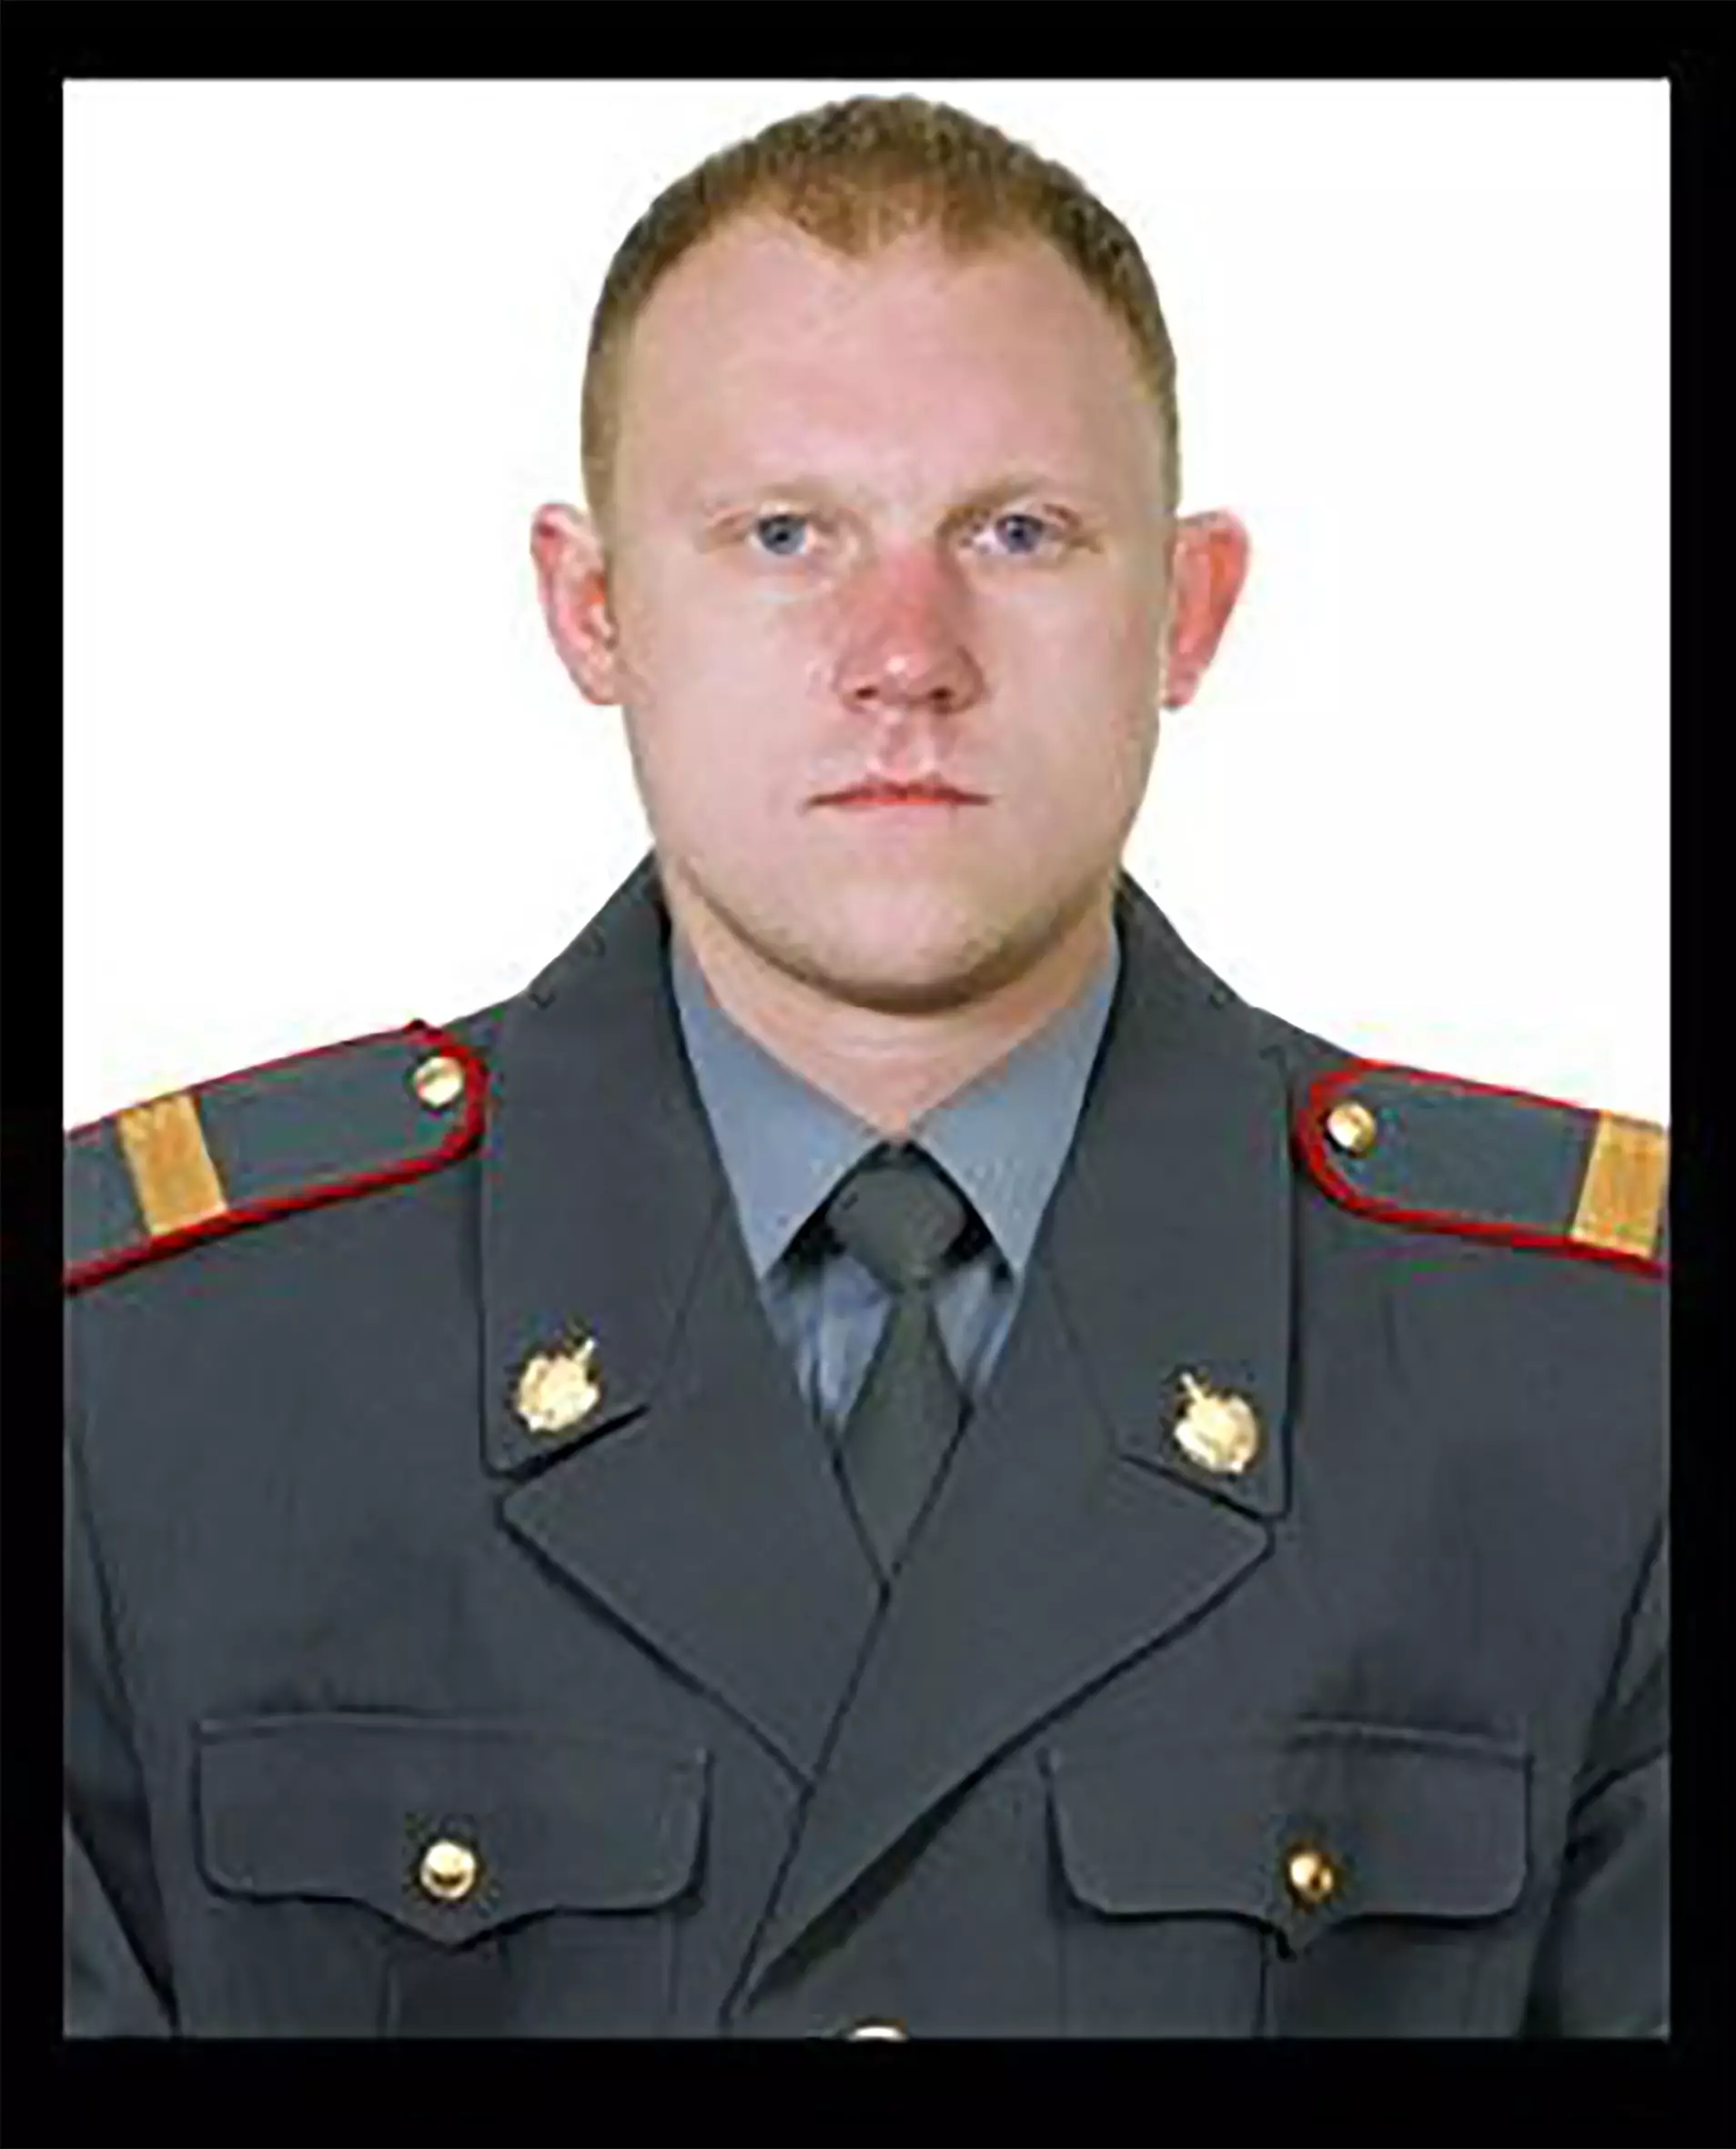 Dmitry Voronin was killed in the gangland shootout.